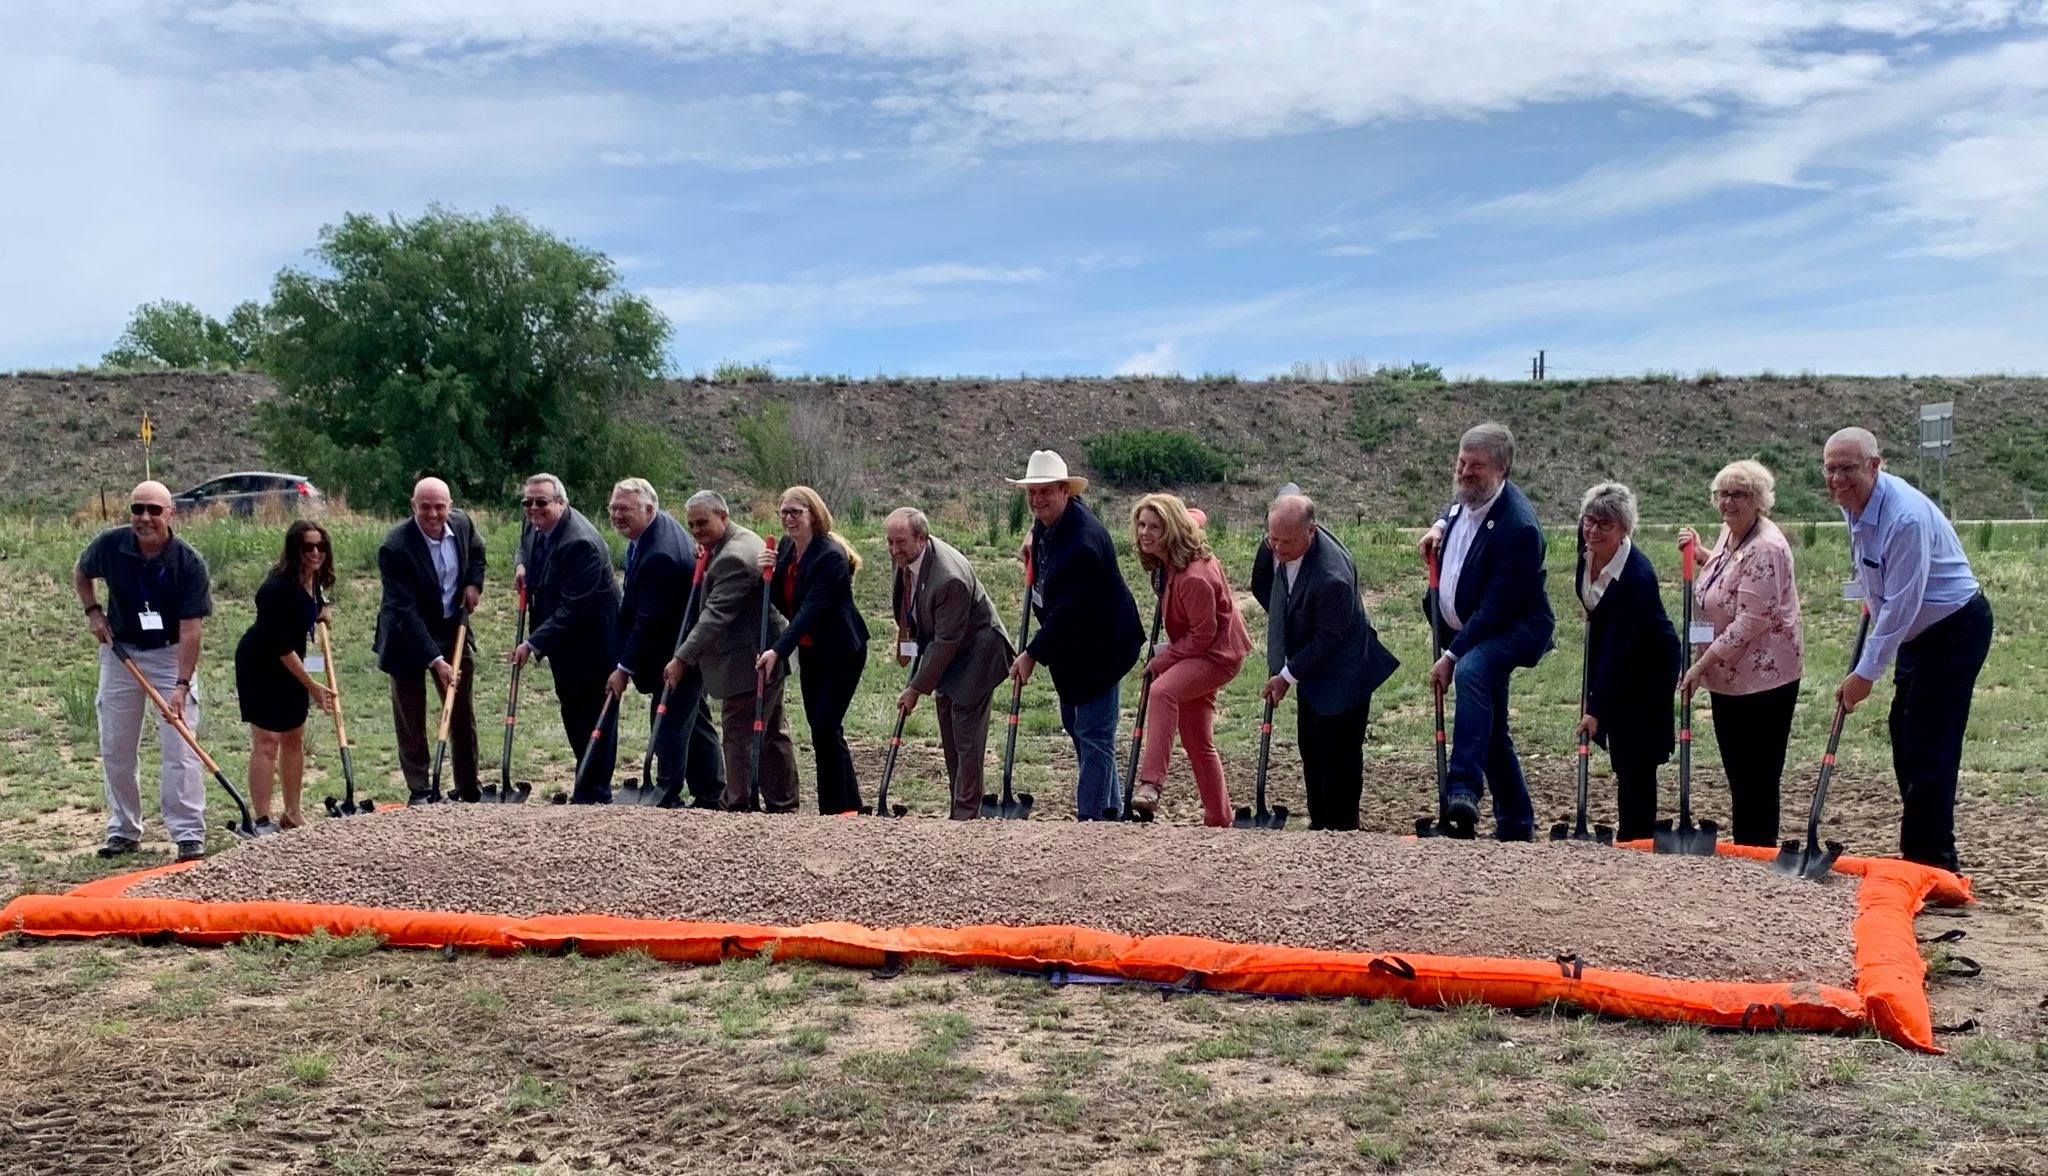 Project partners and members of the community gathered today celebrating the groundbreaking of the Military Access, Mobility & Safety Improvement Project detail image